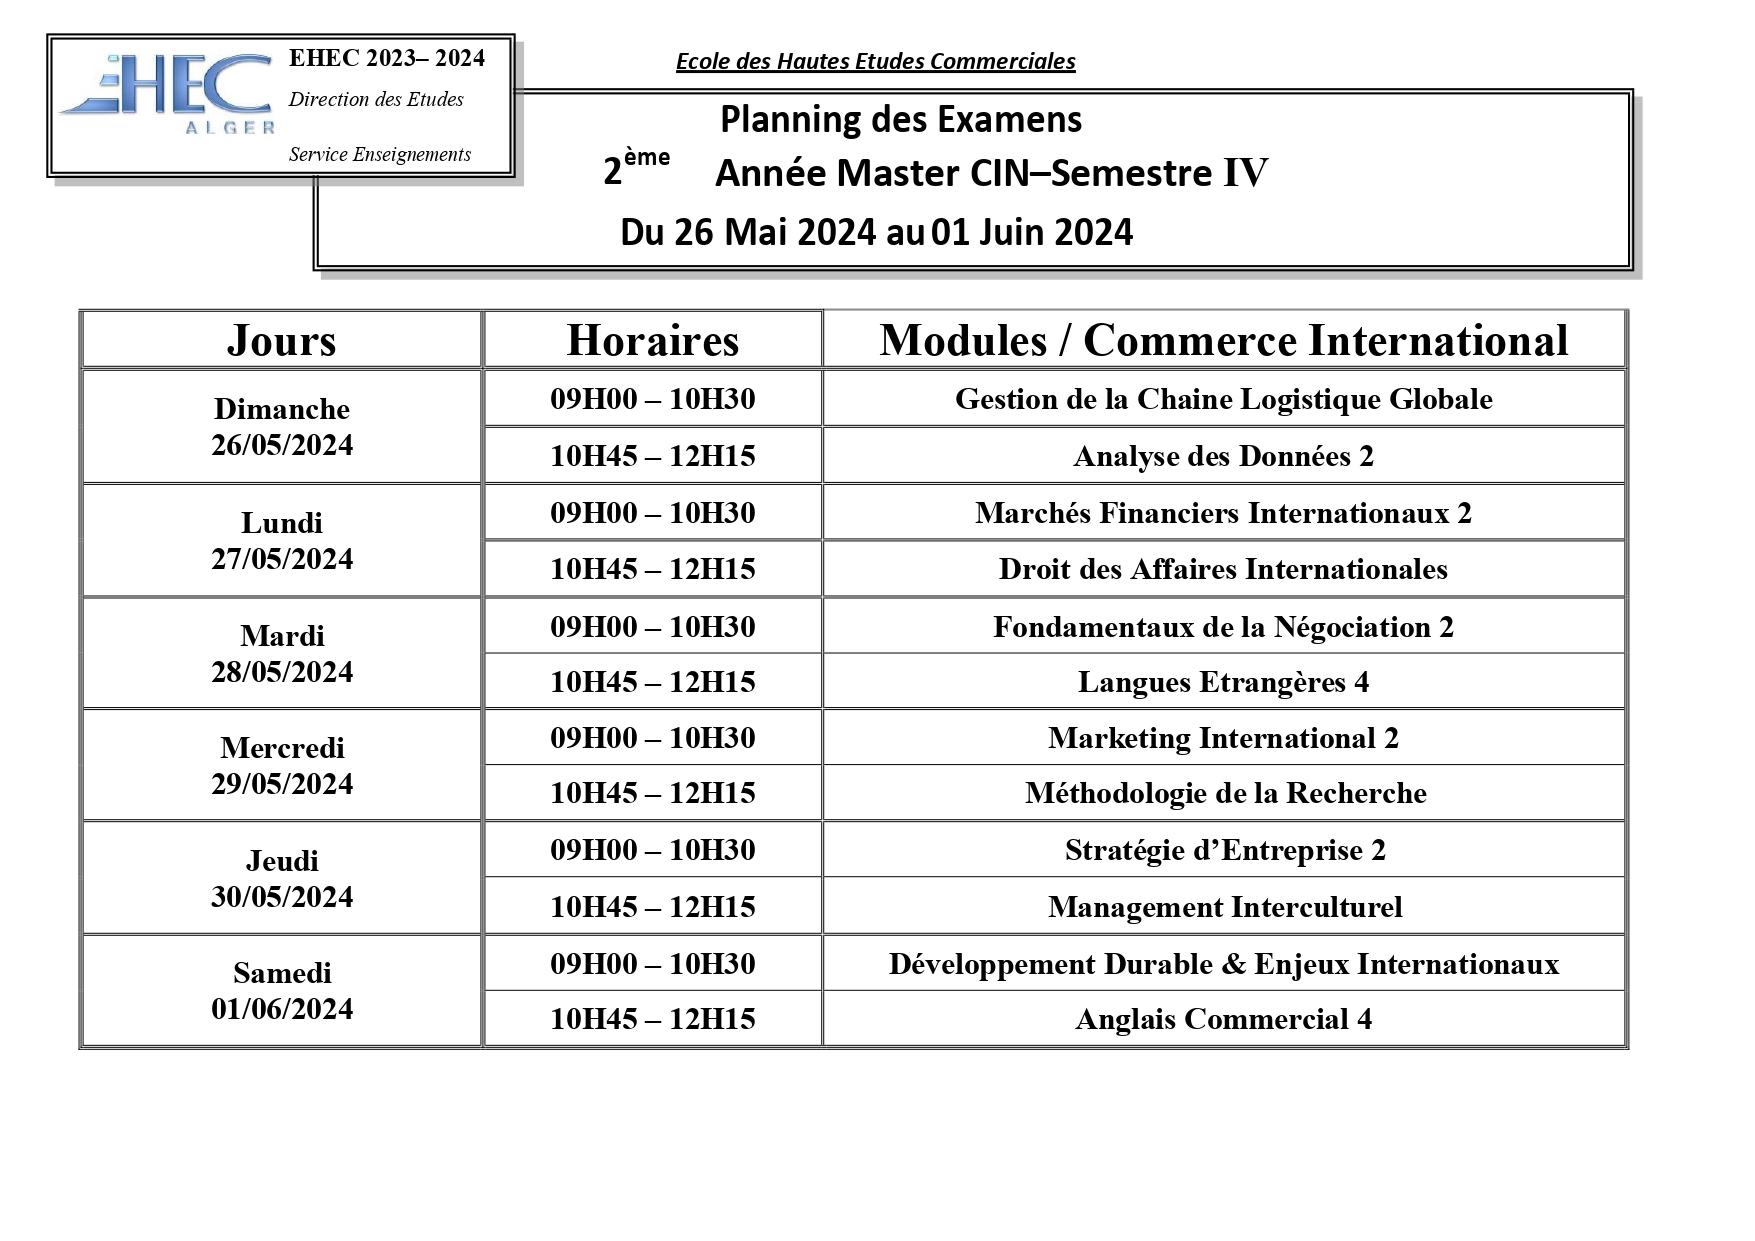 Examination Schedule for 2nd Year Specialization in International Commerce S4 (2023-2024)